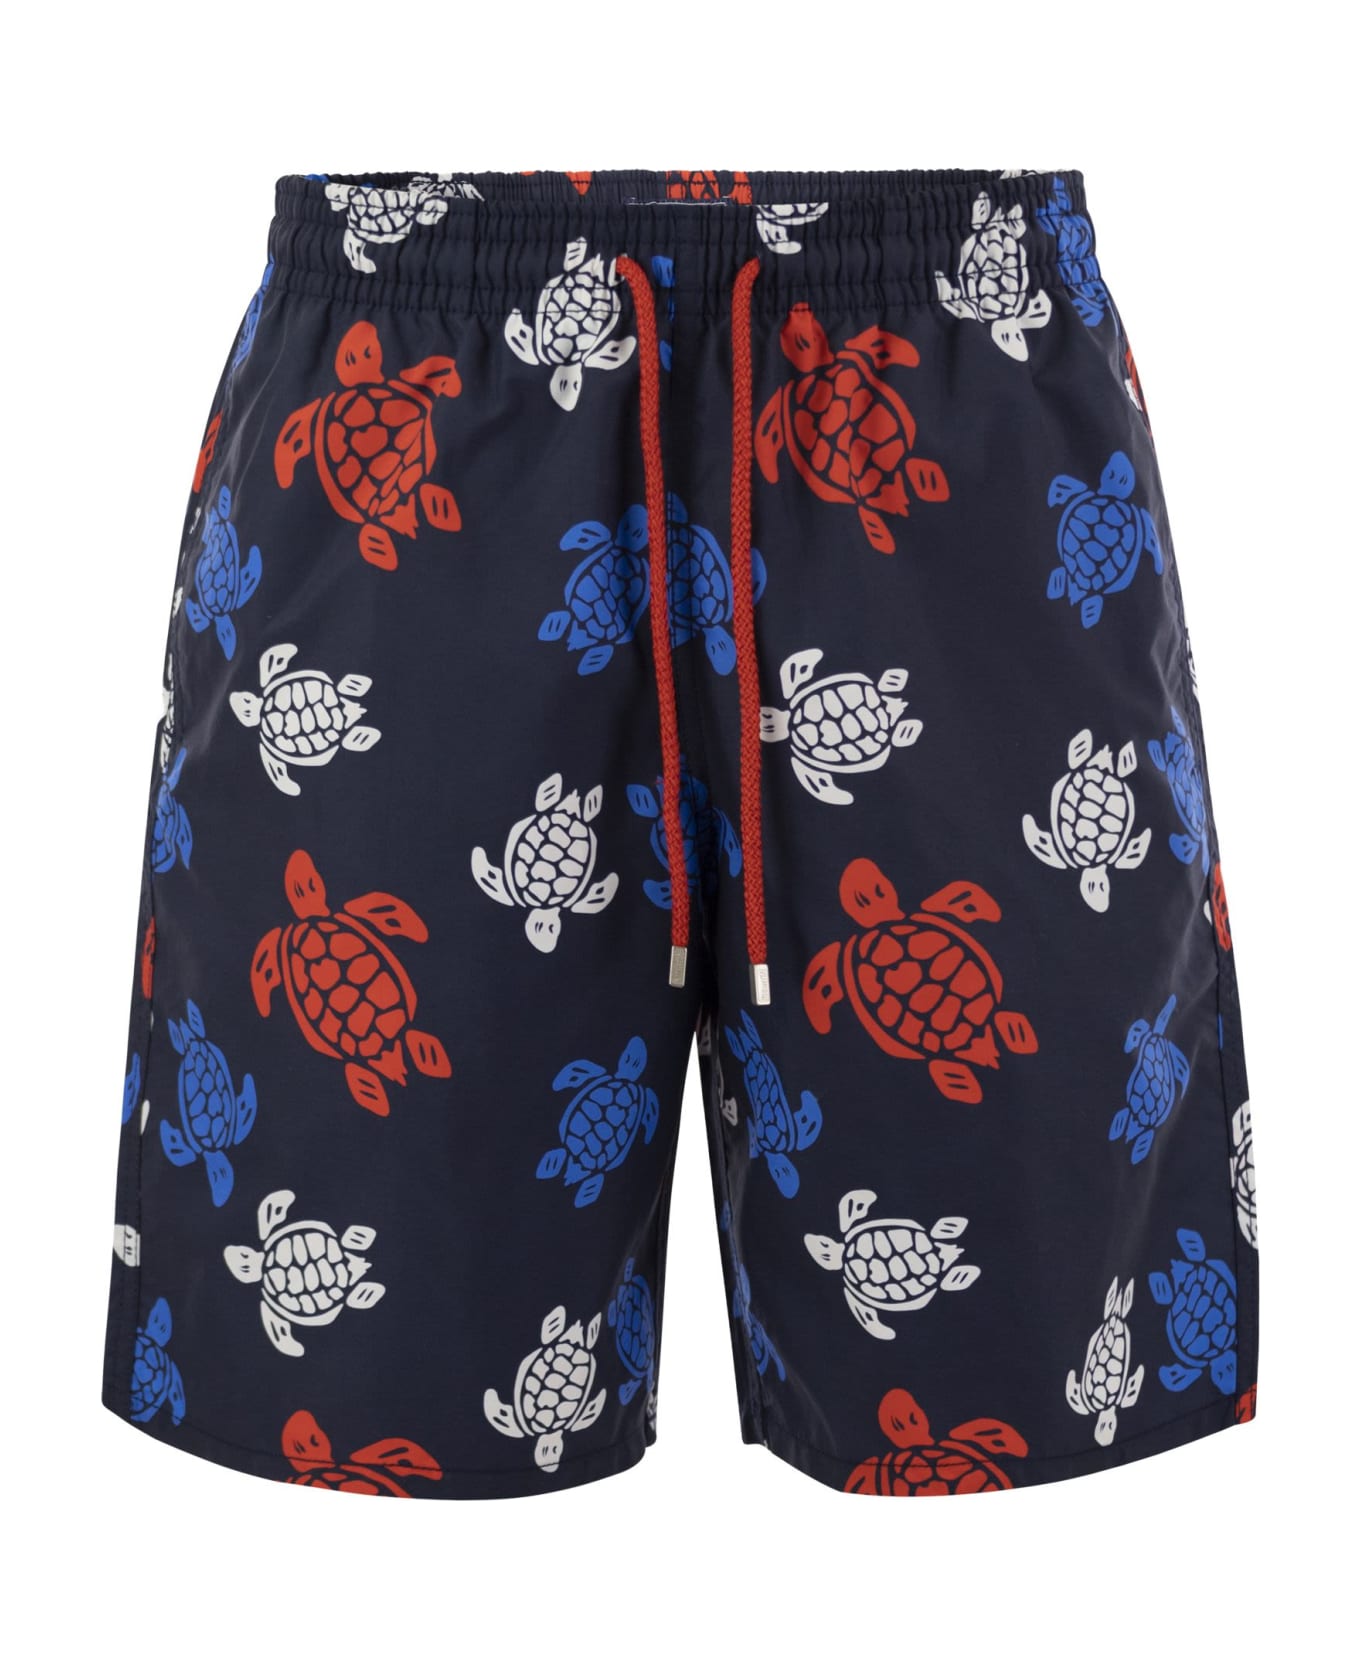 Vilebrequin Tortues Multicolores Swimming Shorts - Night Blue